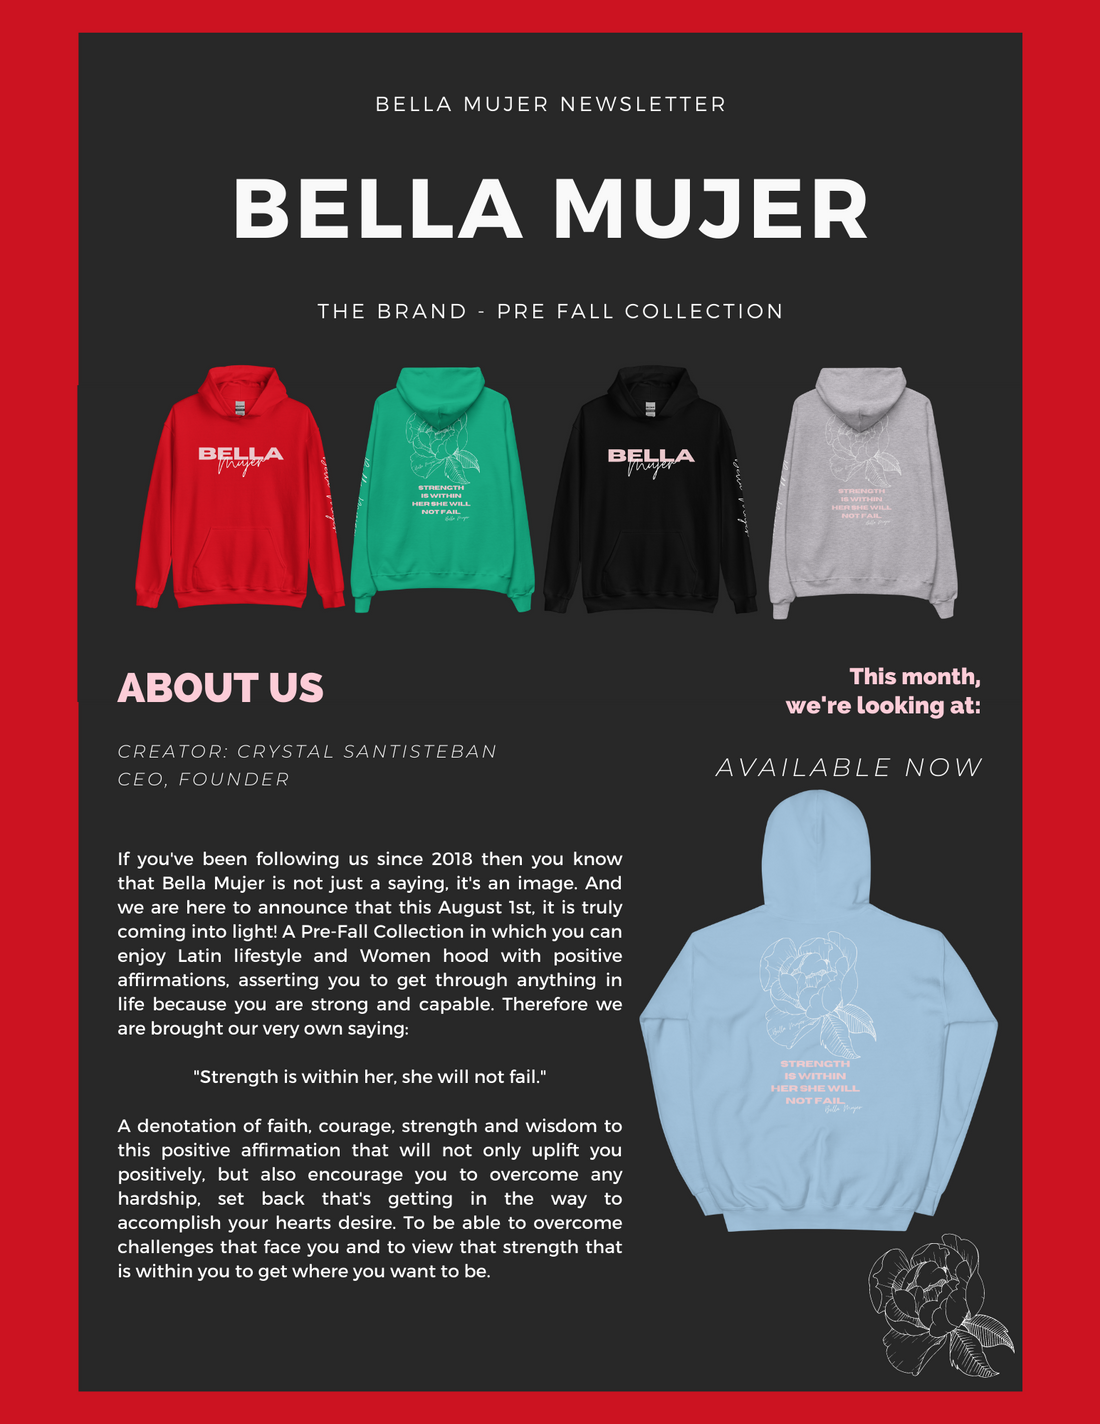 BELLA MUJER THE BRAND - PRE FALL COLLECTION 22"